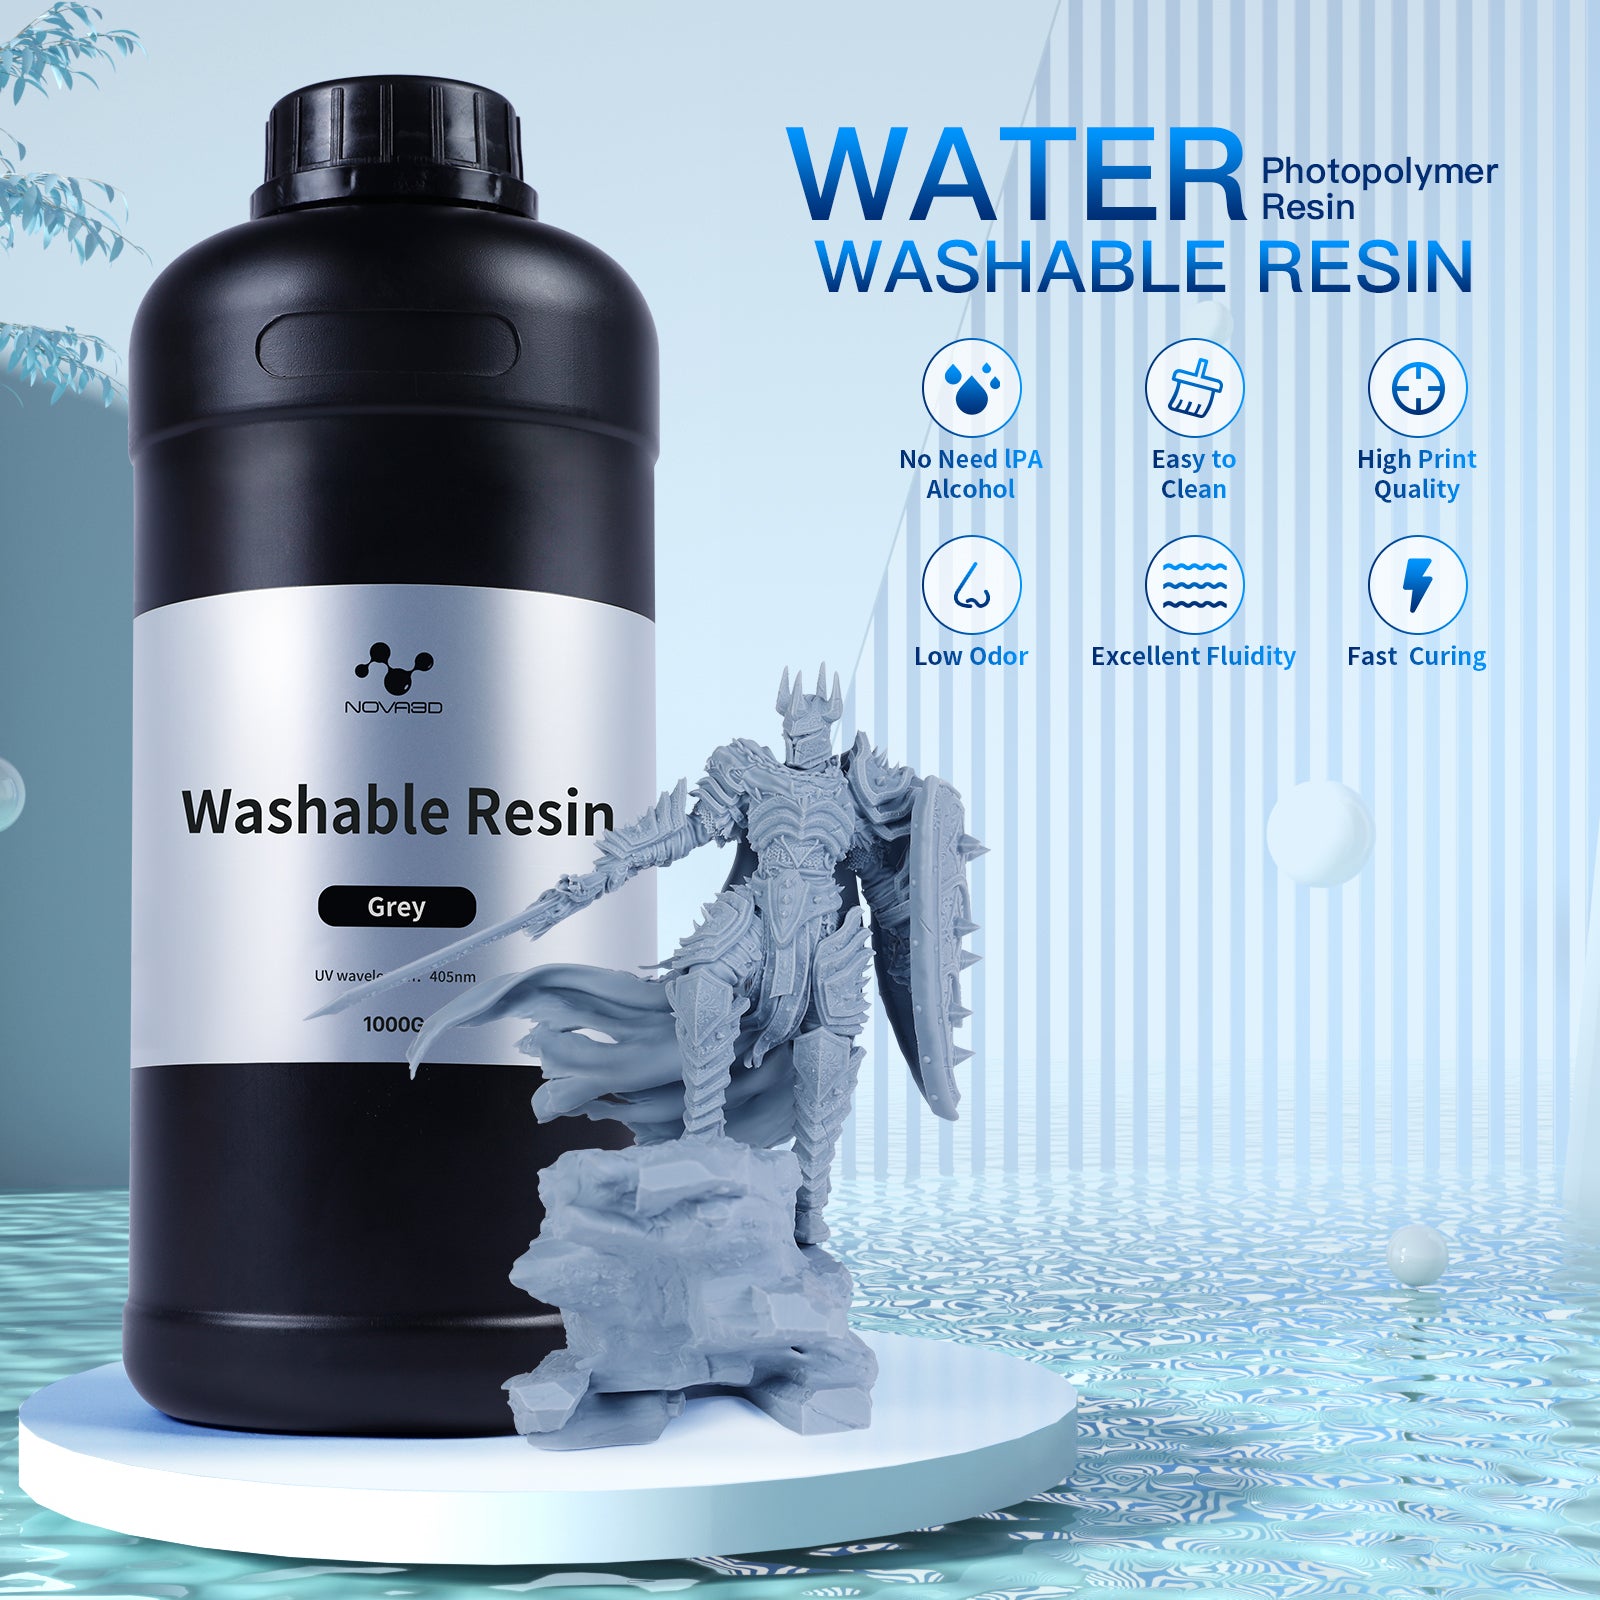  ANYCUBIC Water Washable Resin, 3D Printer Resin with Low  Viscosity and Fast Printing, 405nm High Precision UV-Curing 3D Resin,  Photopolymer Resin for 8K Capable LCD DLP 3D Printing (Clear, 500g) 